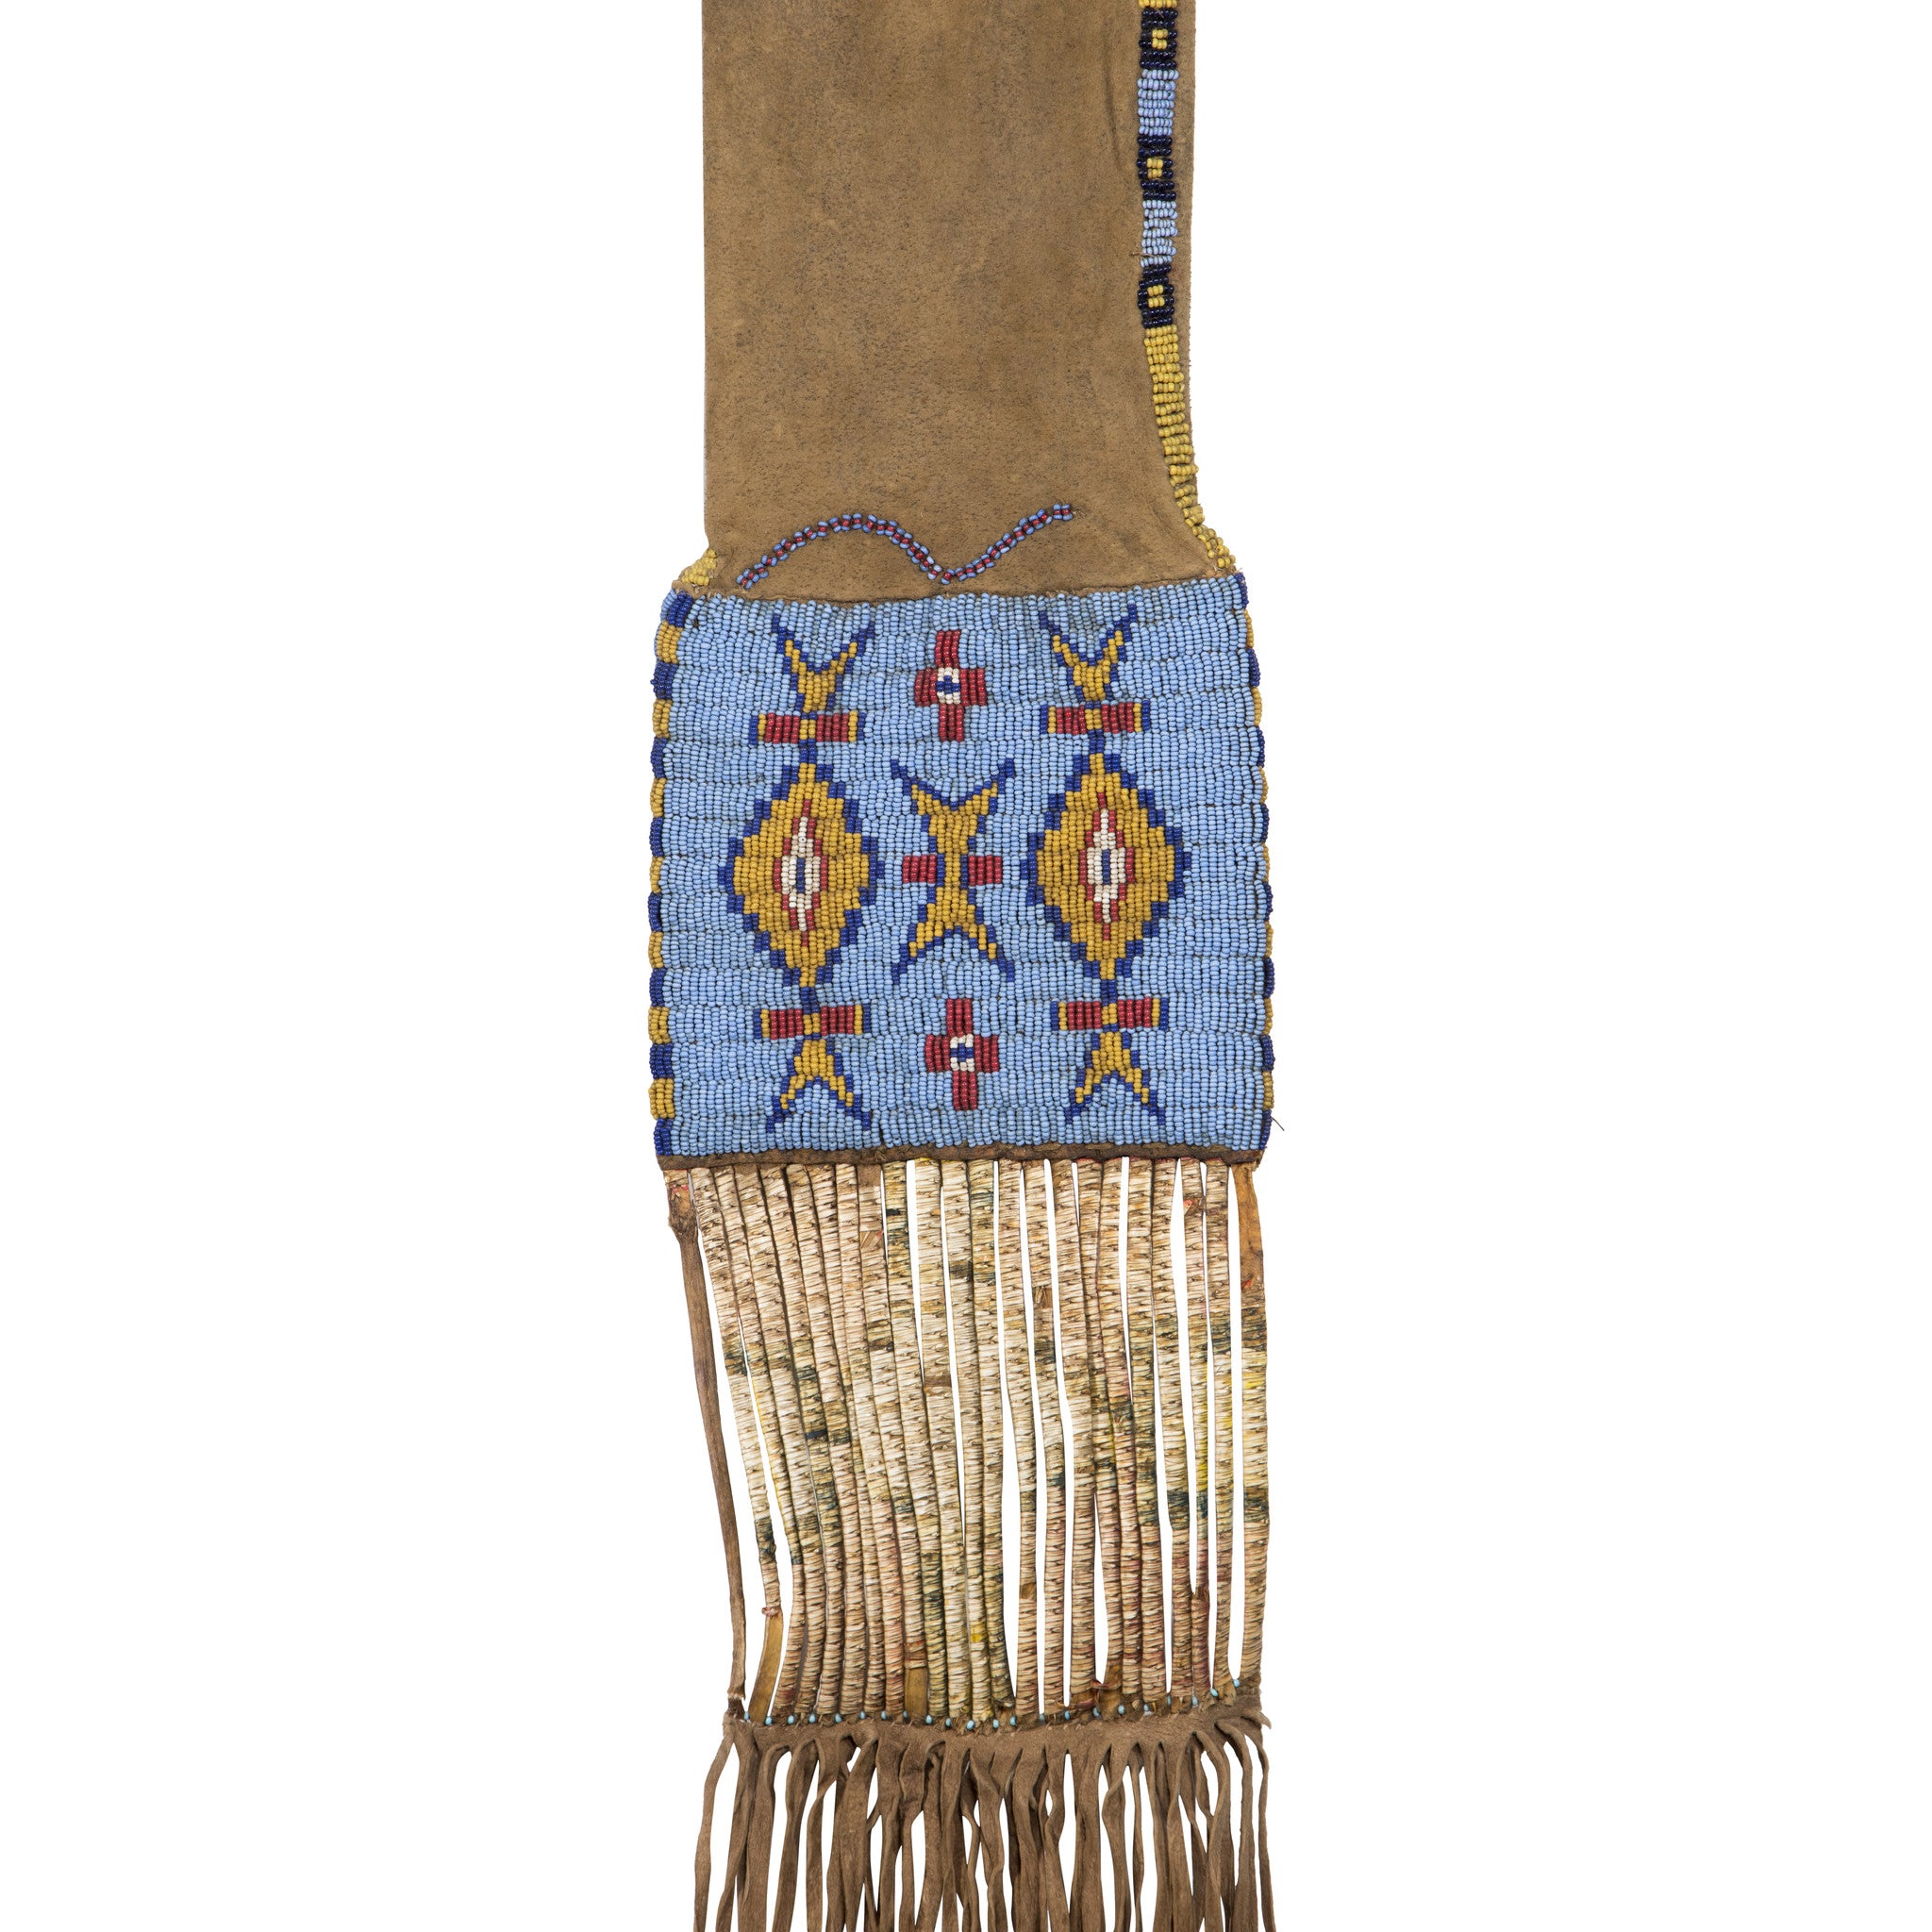 Early Sioux Pipe Bag